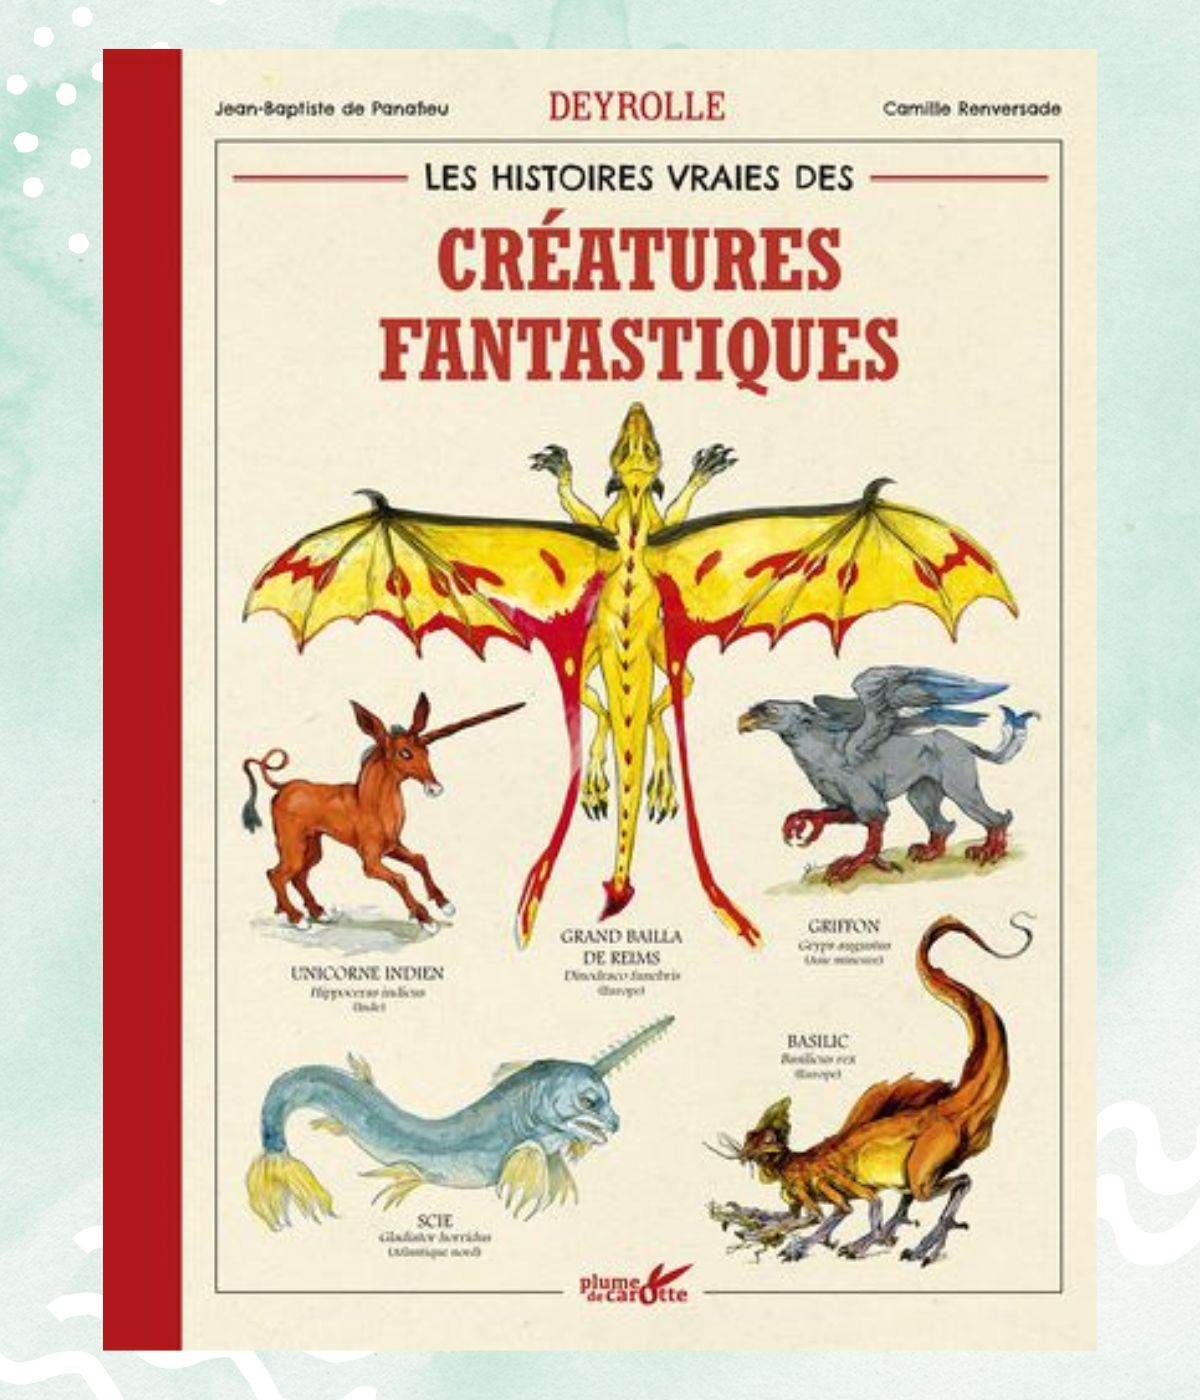 The true story of fantastic creatures